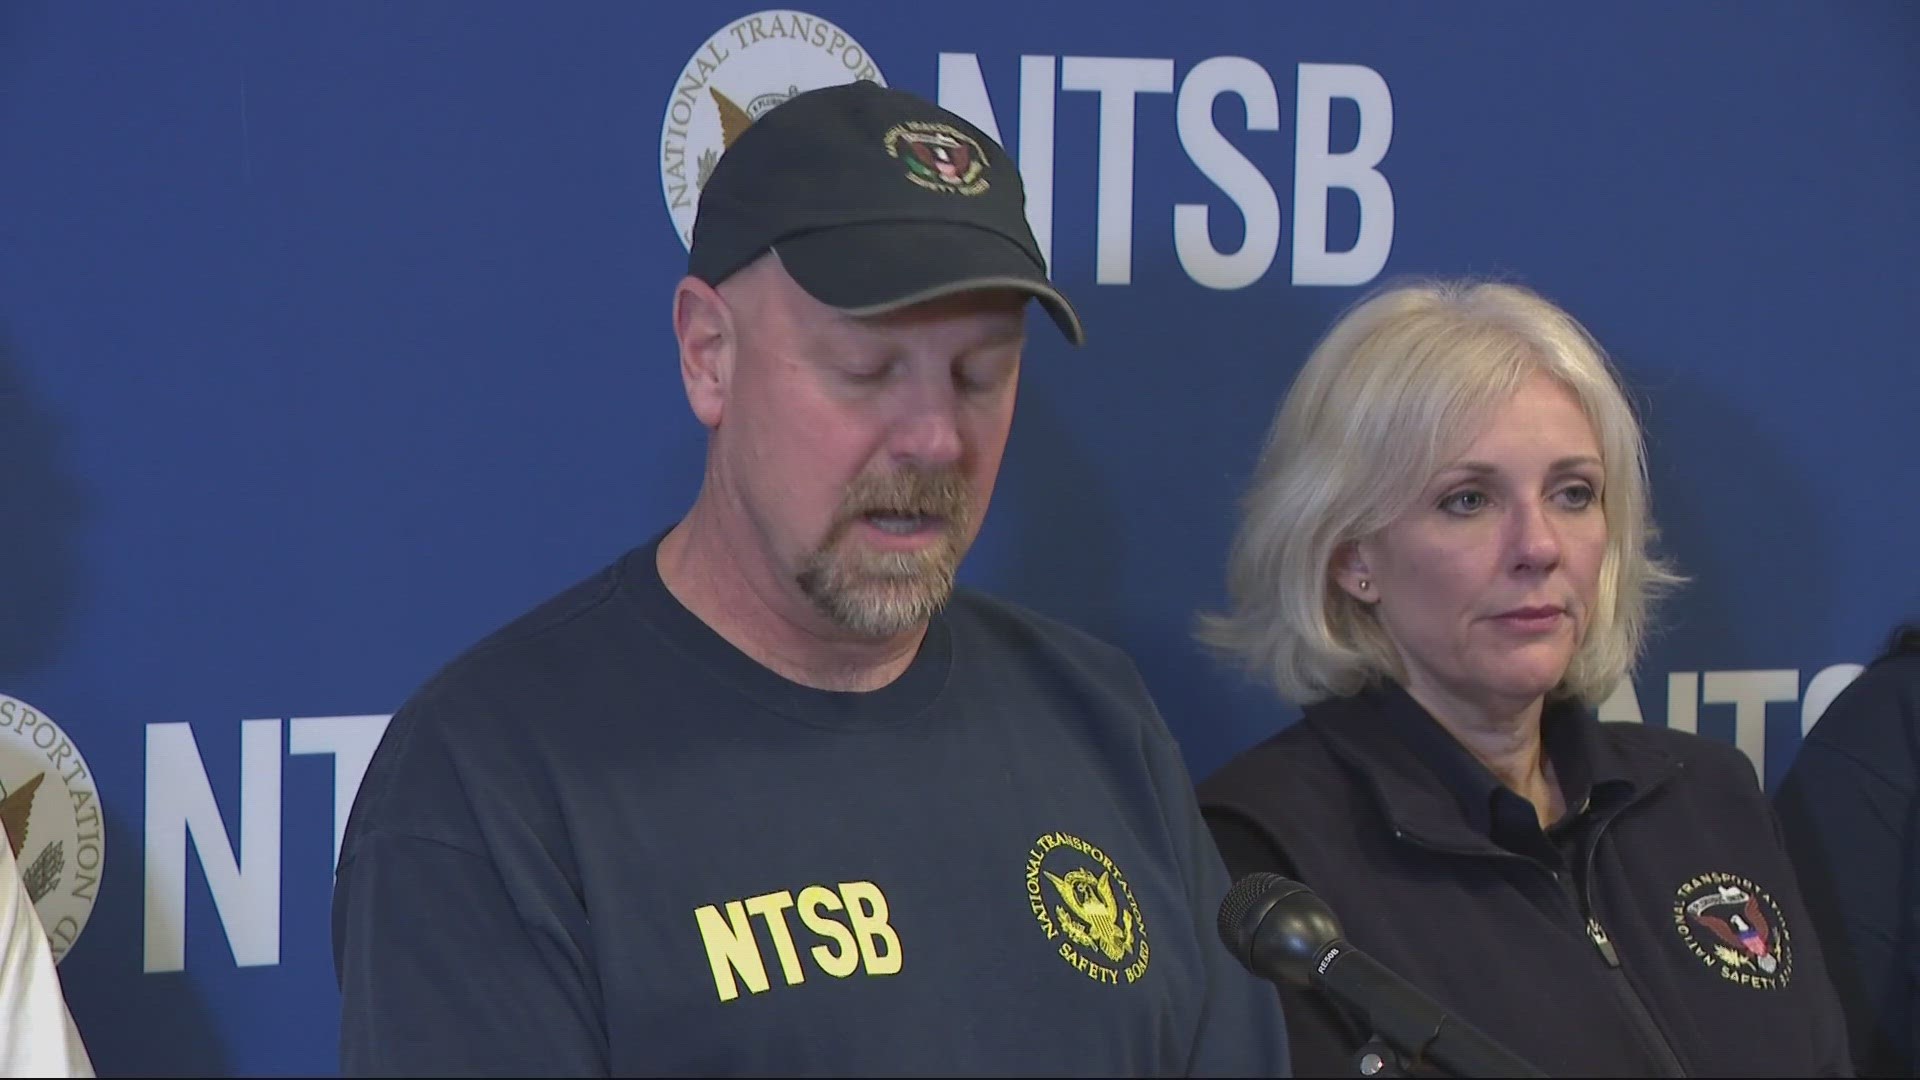 The four bolts that restrict vertical movement of the door plug have not been found and an NTSB officials said they're unsure at this time if they "existed there."